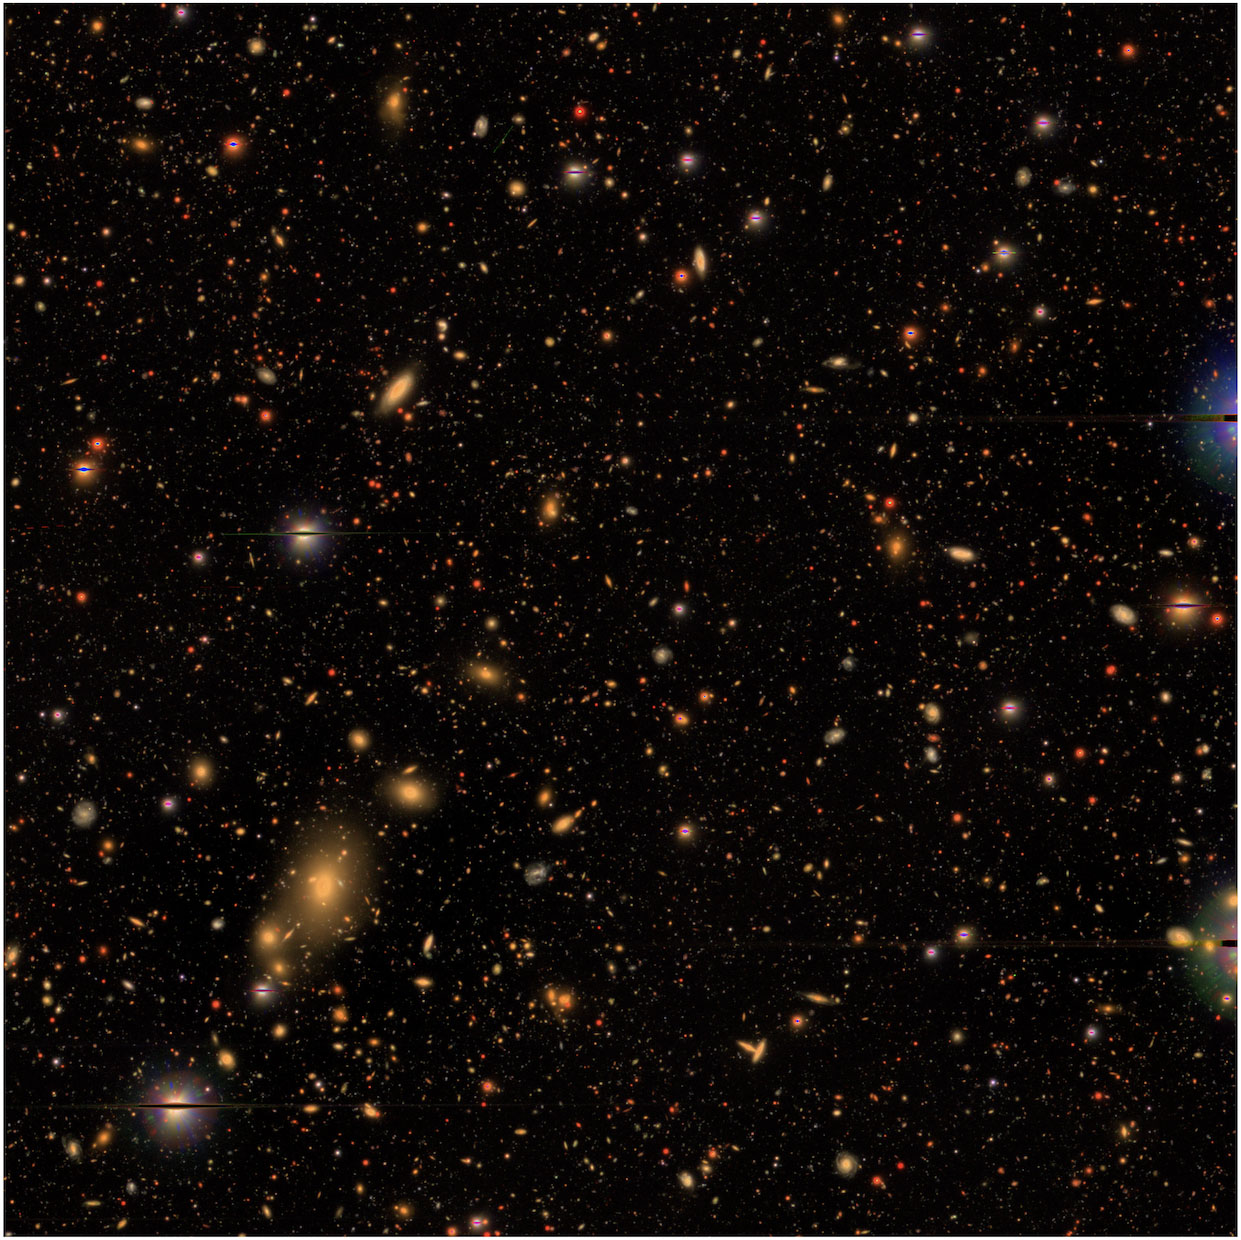 The numerous objects shown in yellow to red all represent galaxies hundreds of millions of light years away from Earth